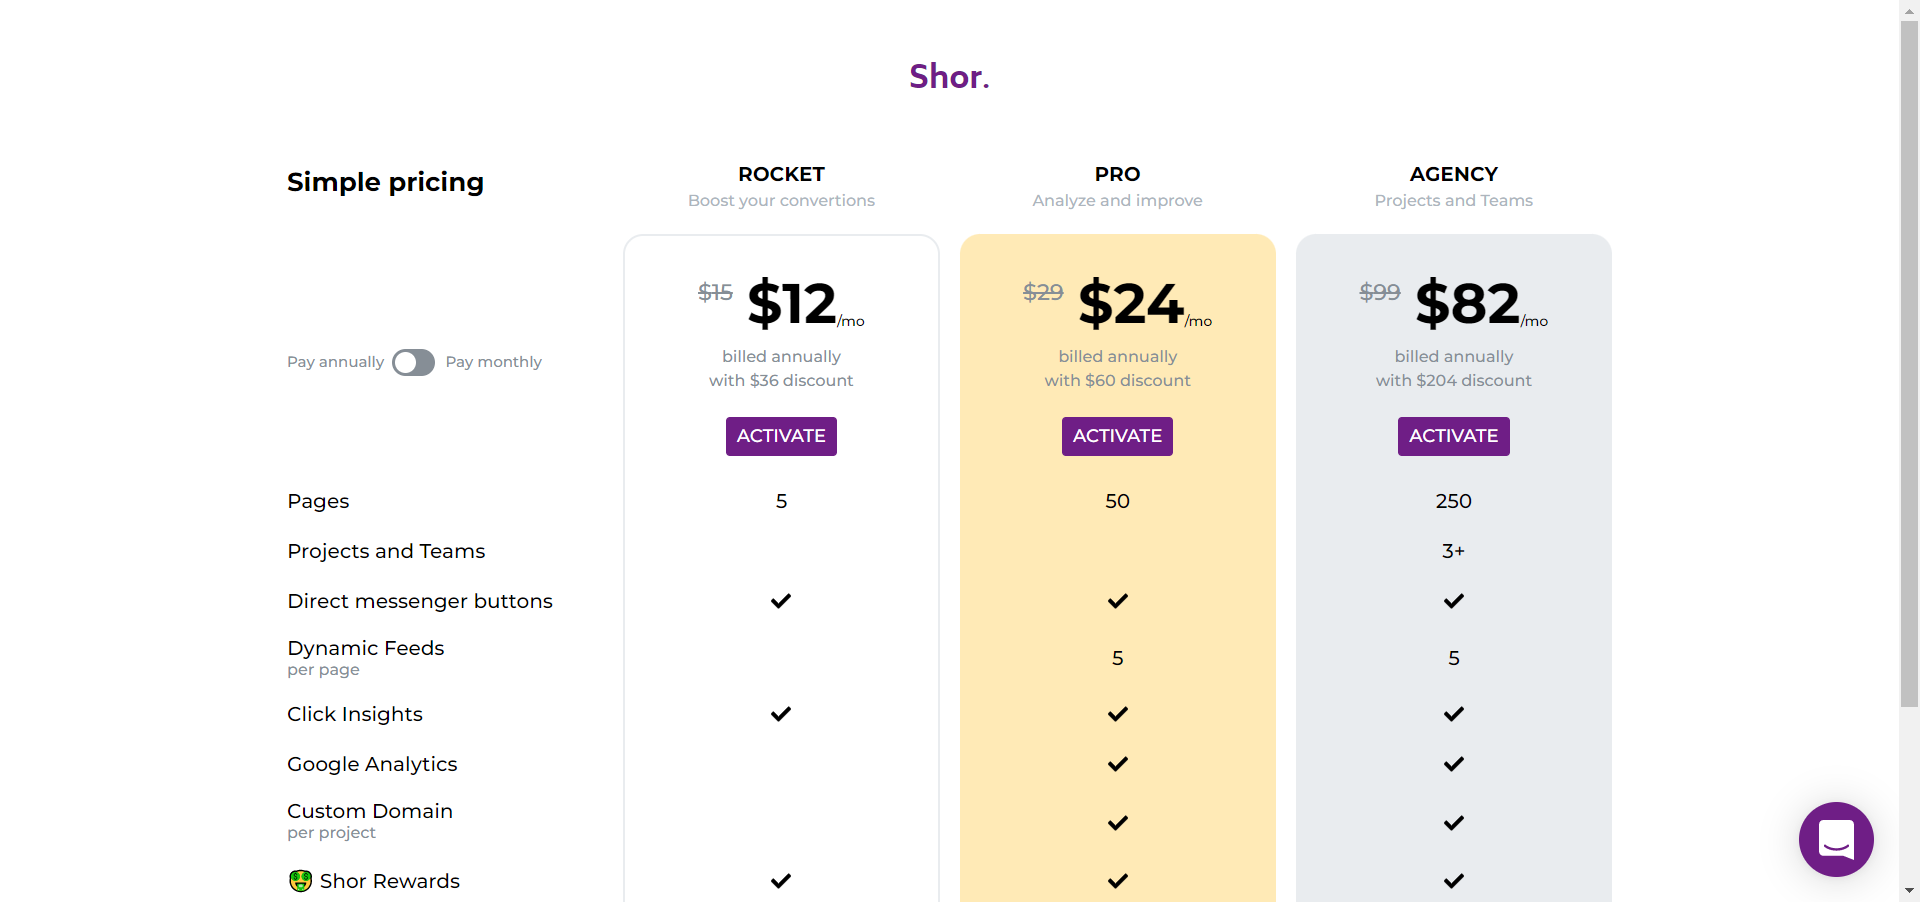 Shorby pricing